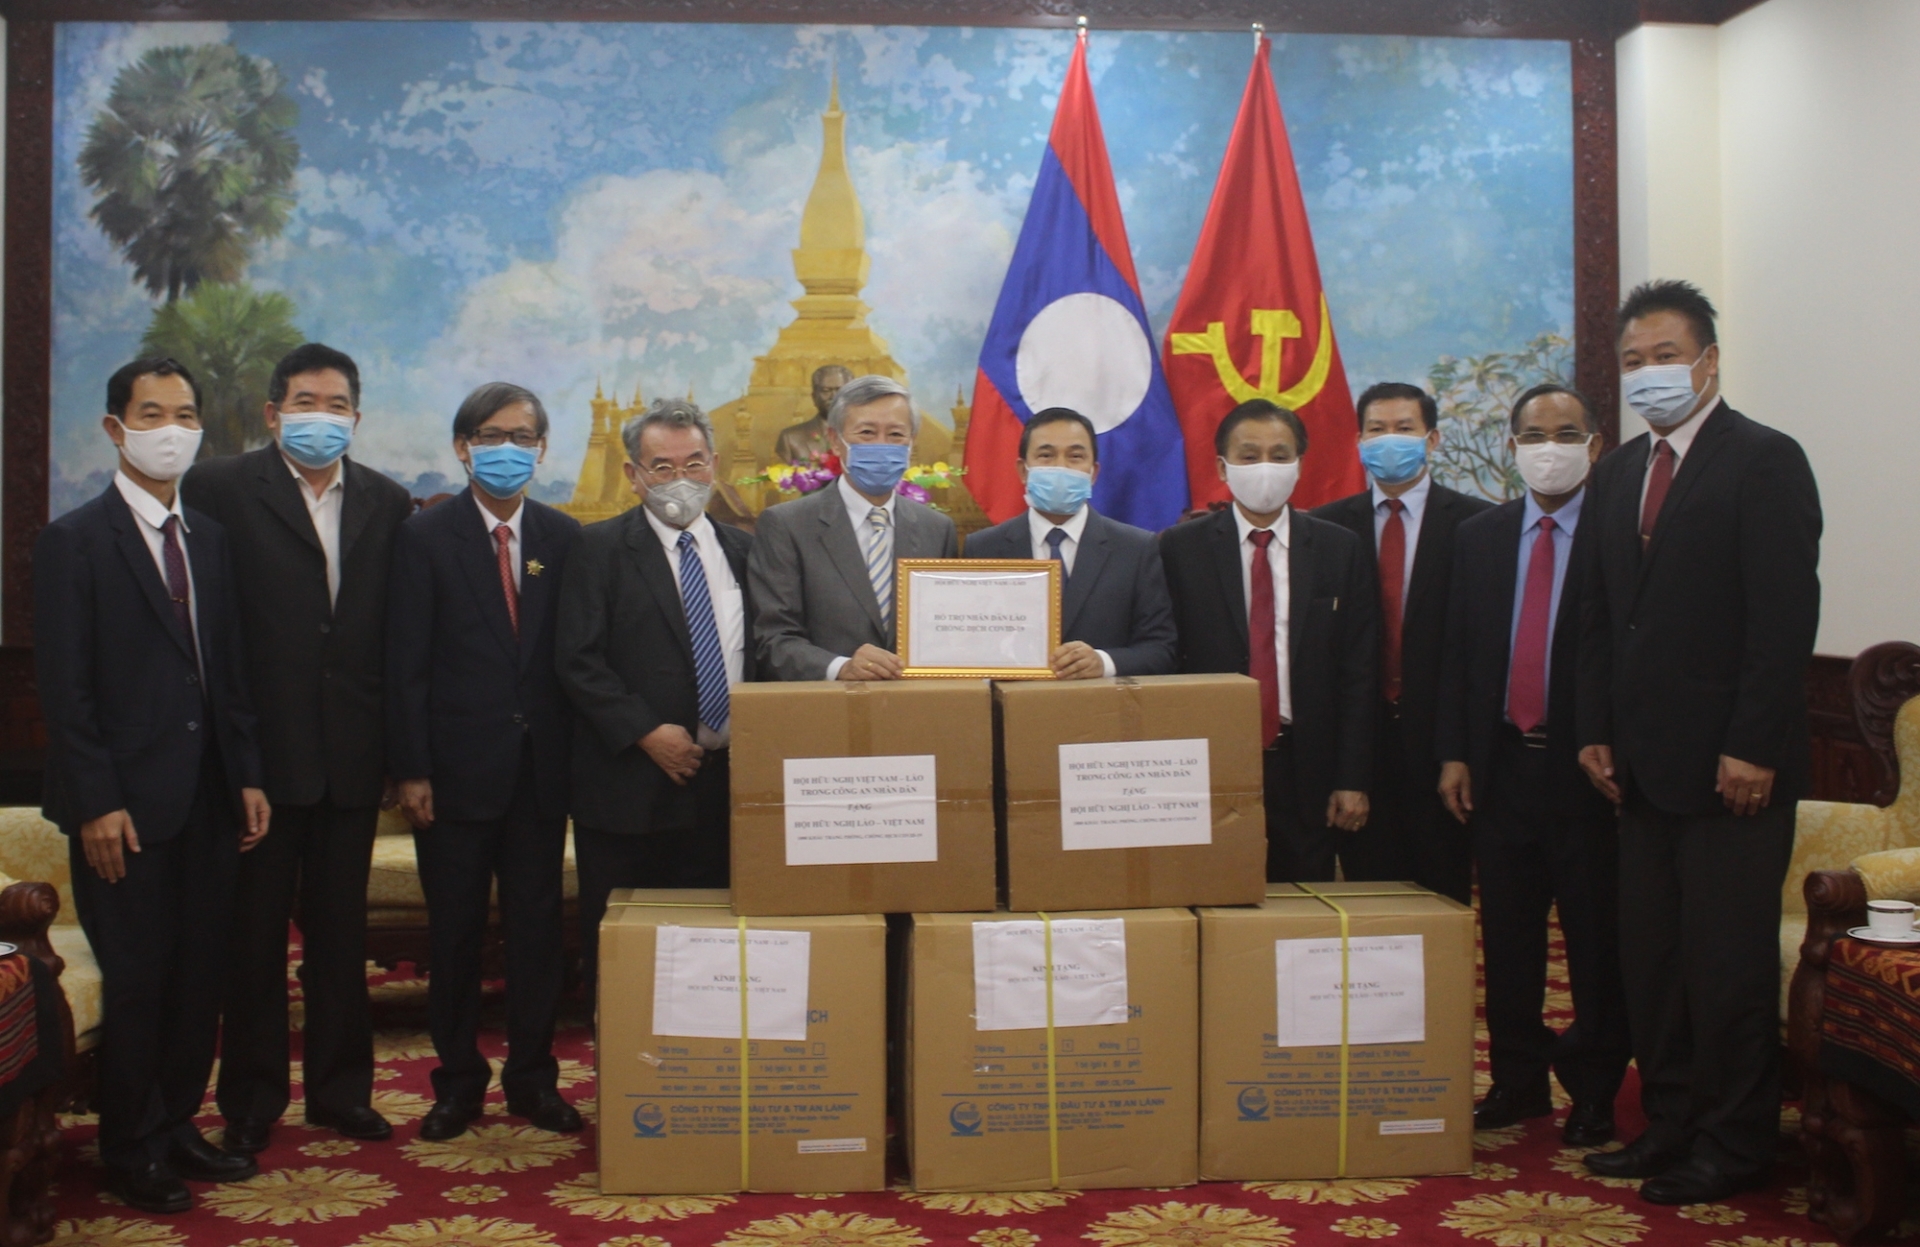 friendship association assists laos covid 19 fight with 500 protective suits 18500 masks